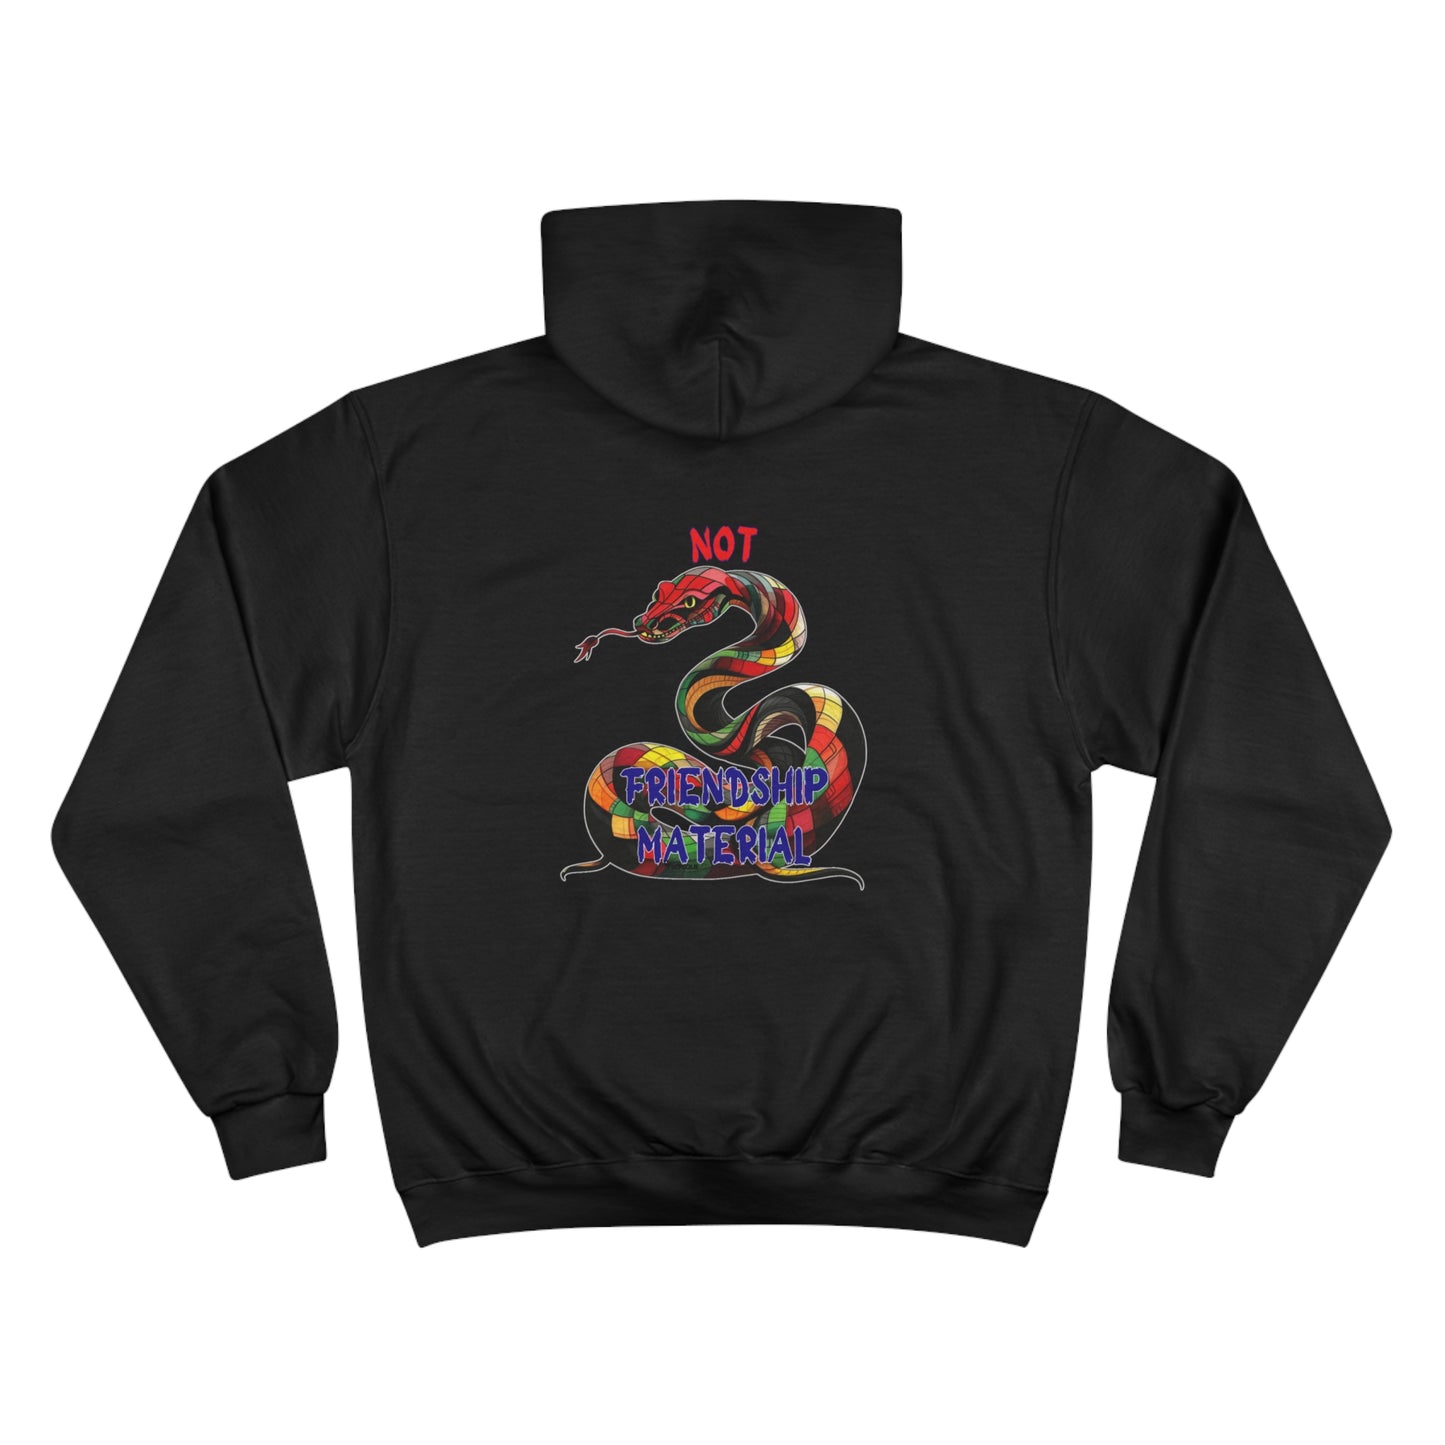 Everyone Is Not Friendship Material- Hoodie - Empowerment Snake Artwork -Candid Cultural Message